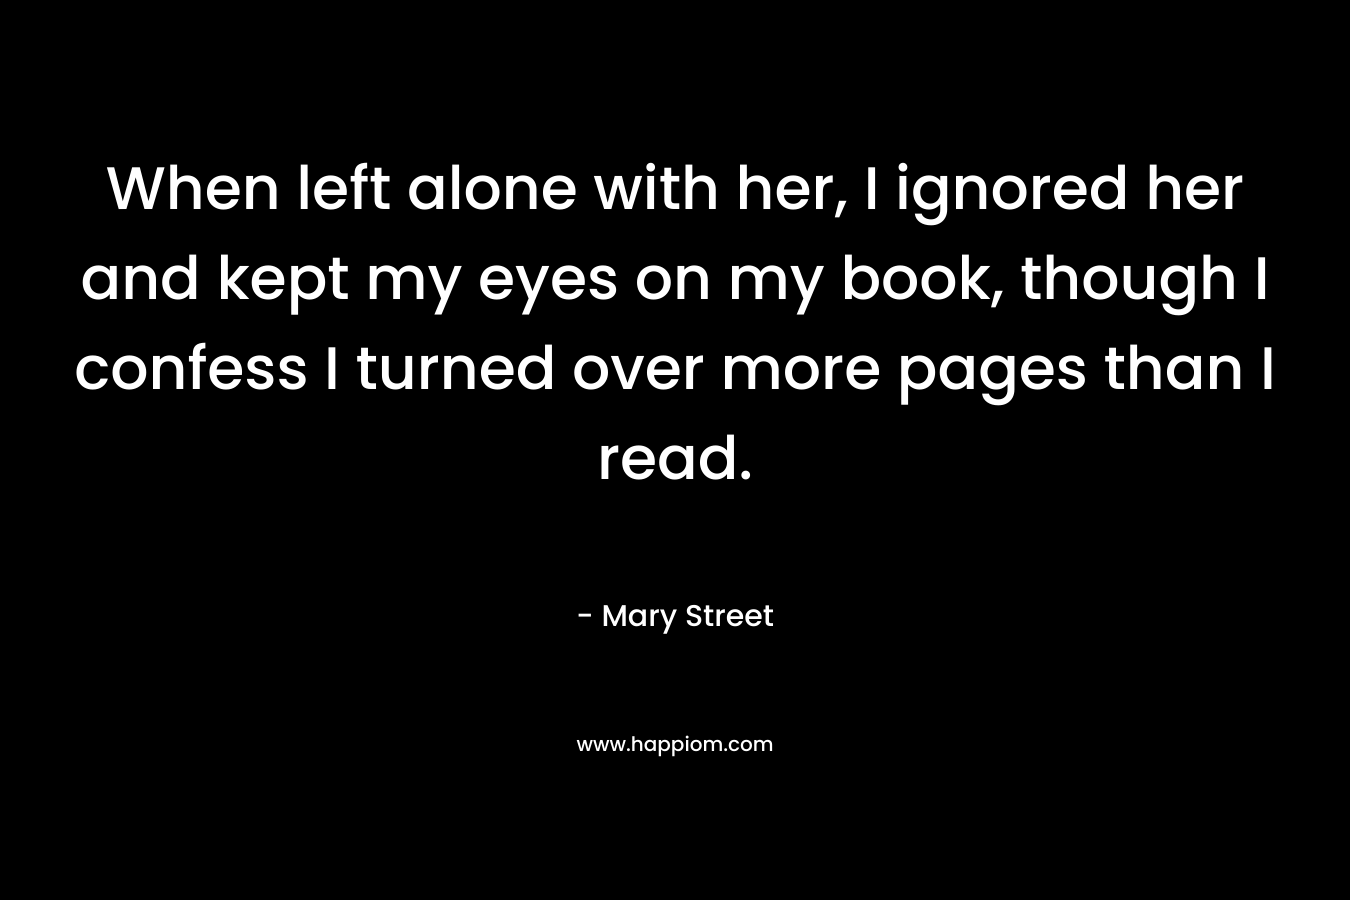 When left alone with her, I ignored her and kept my eyes on my book, though I confess I turned over more pages than I read. – Mary Street